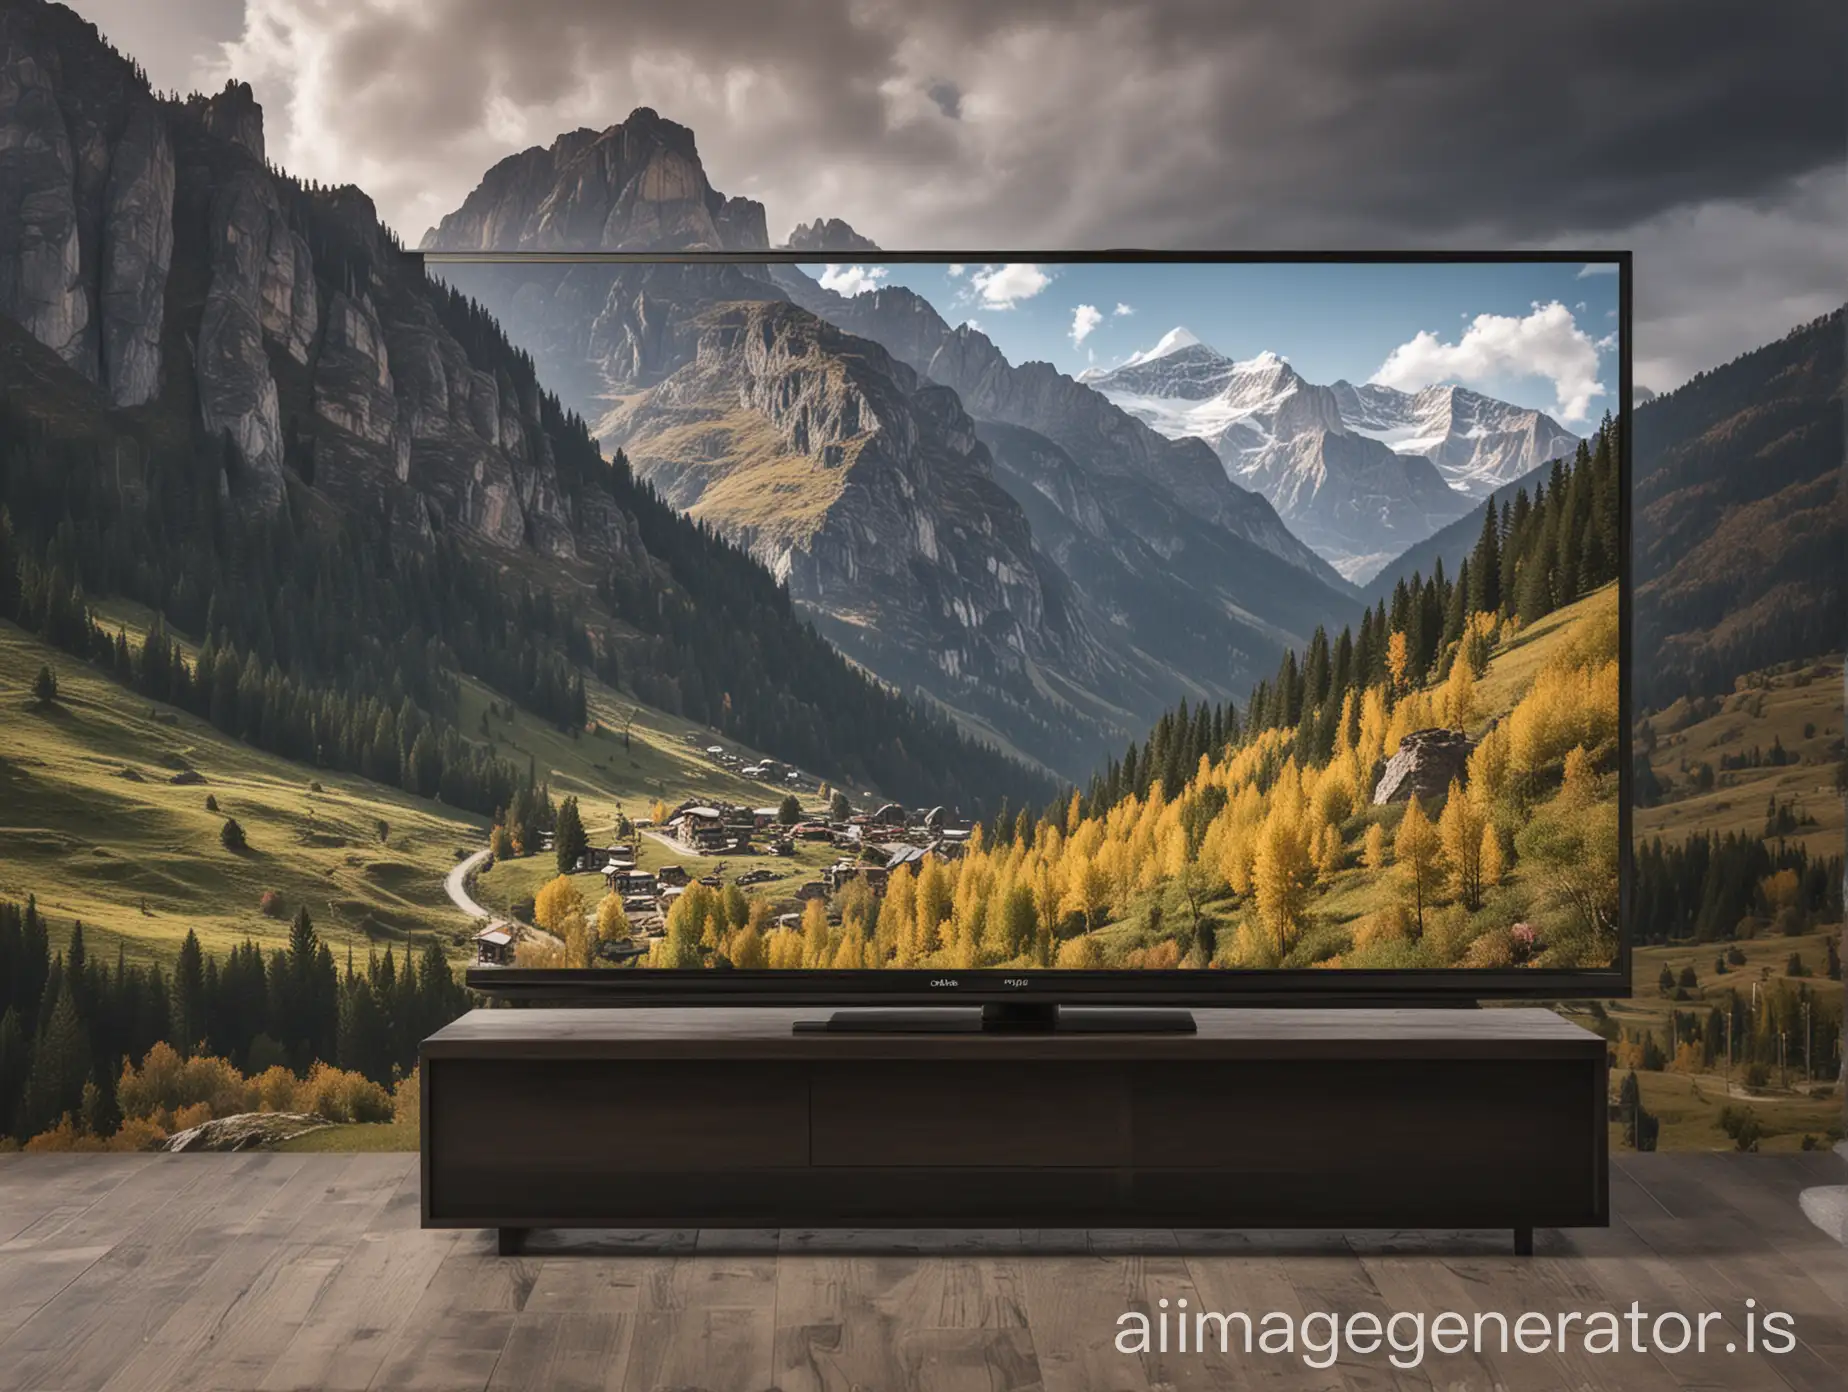 Modern-Television-in-Front-of-Majestic-Mountain-Landscape